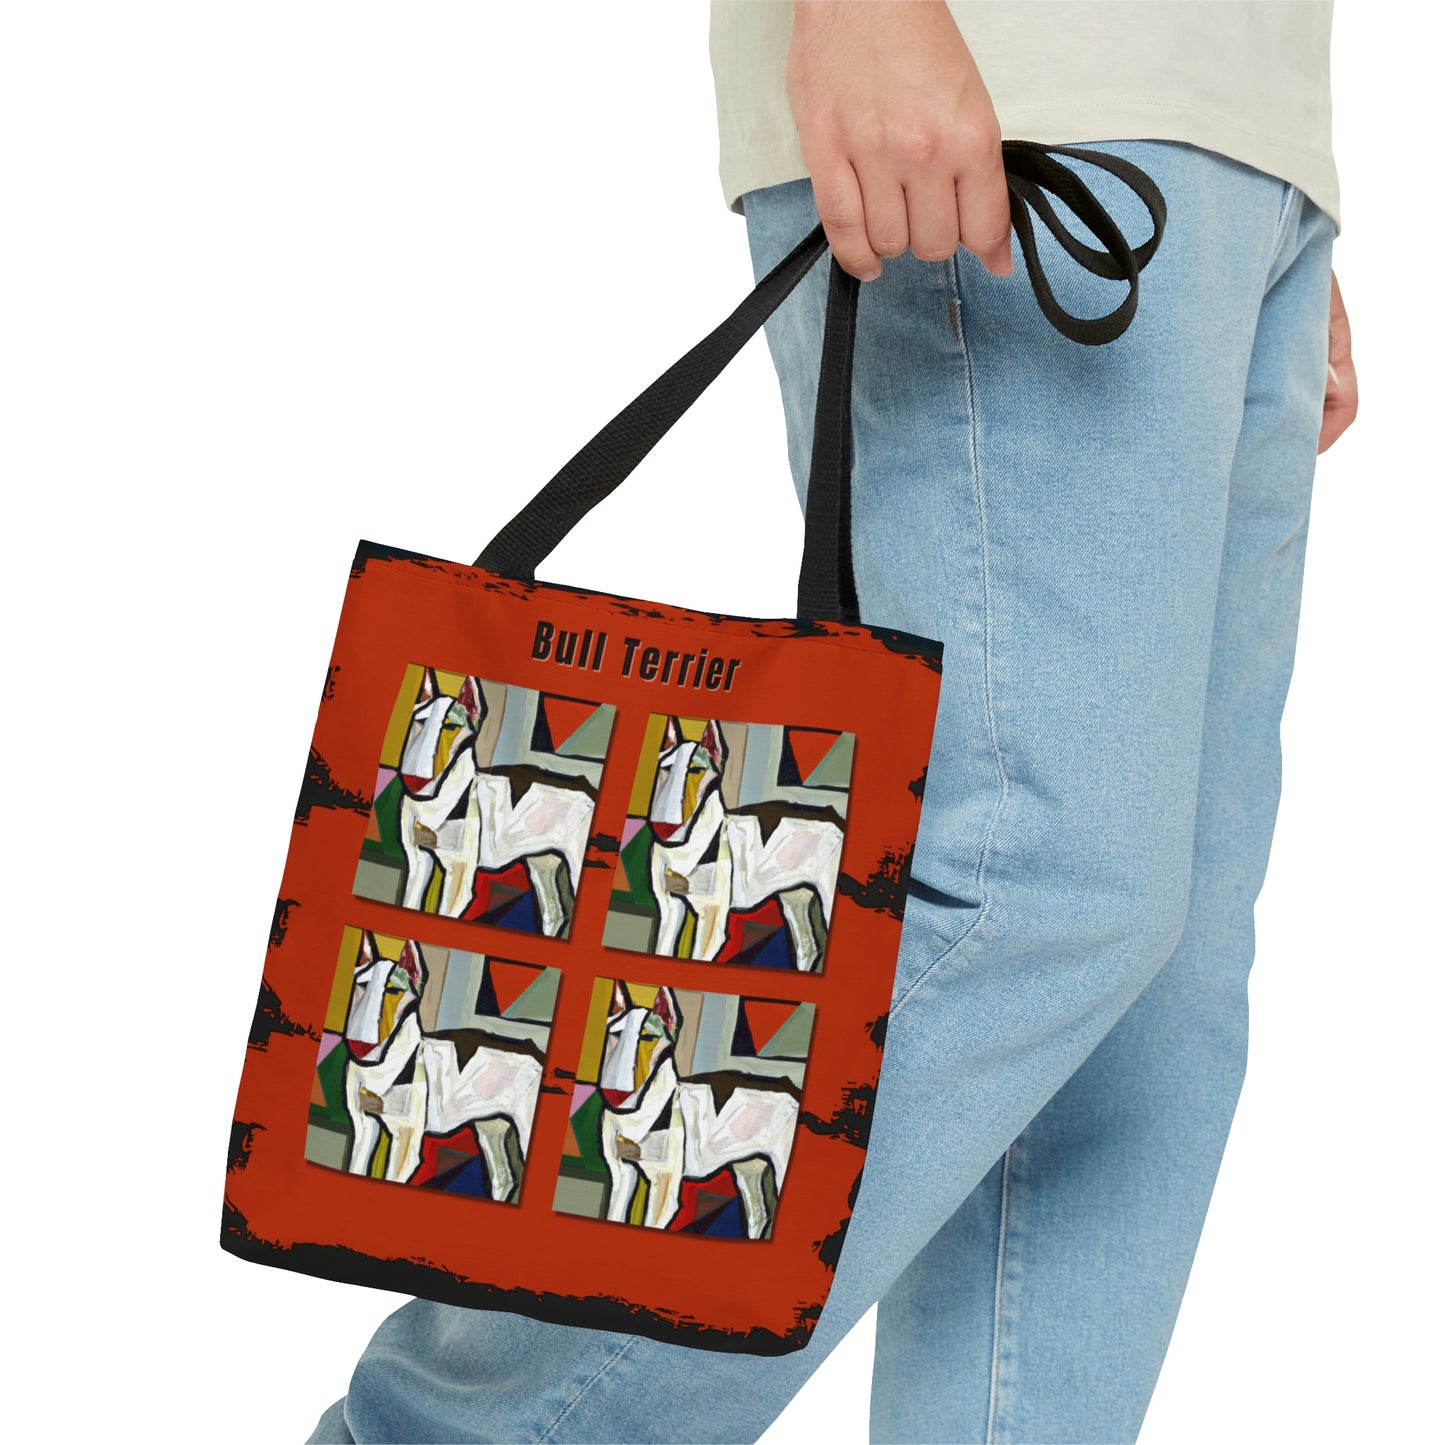 Bull Terrier Tote Bag, Picasso Style